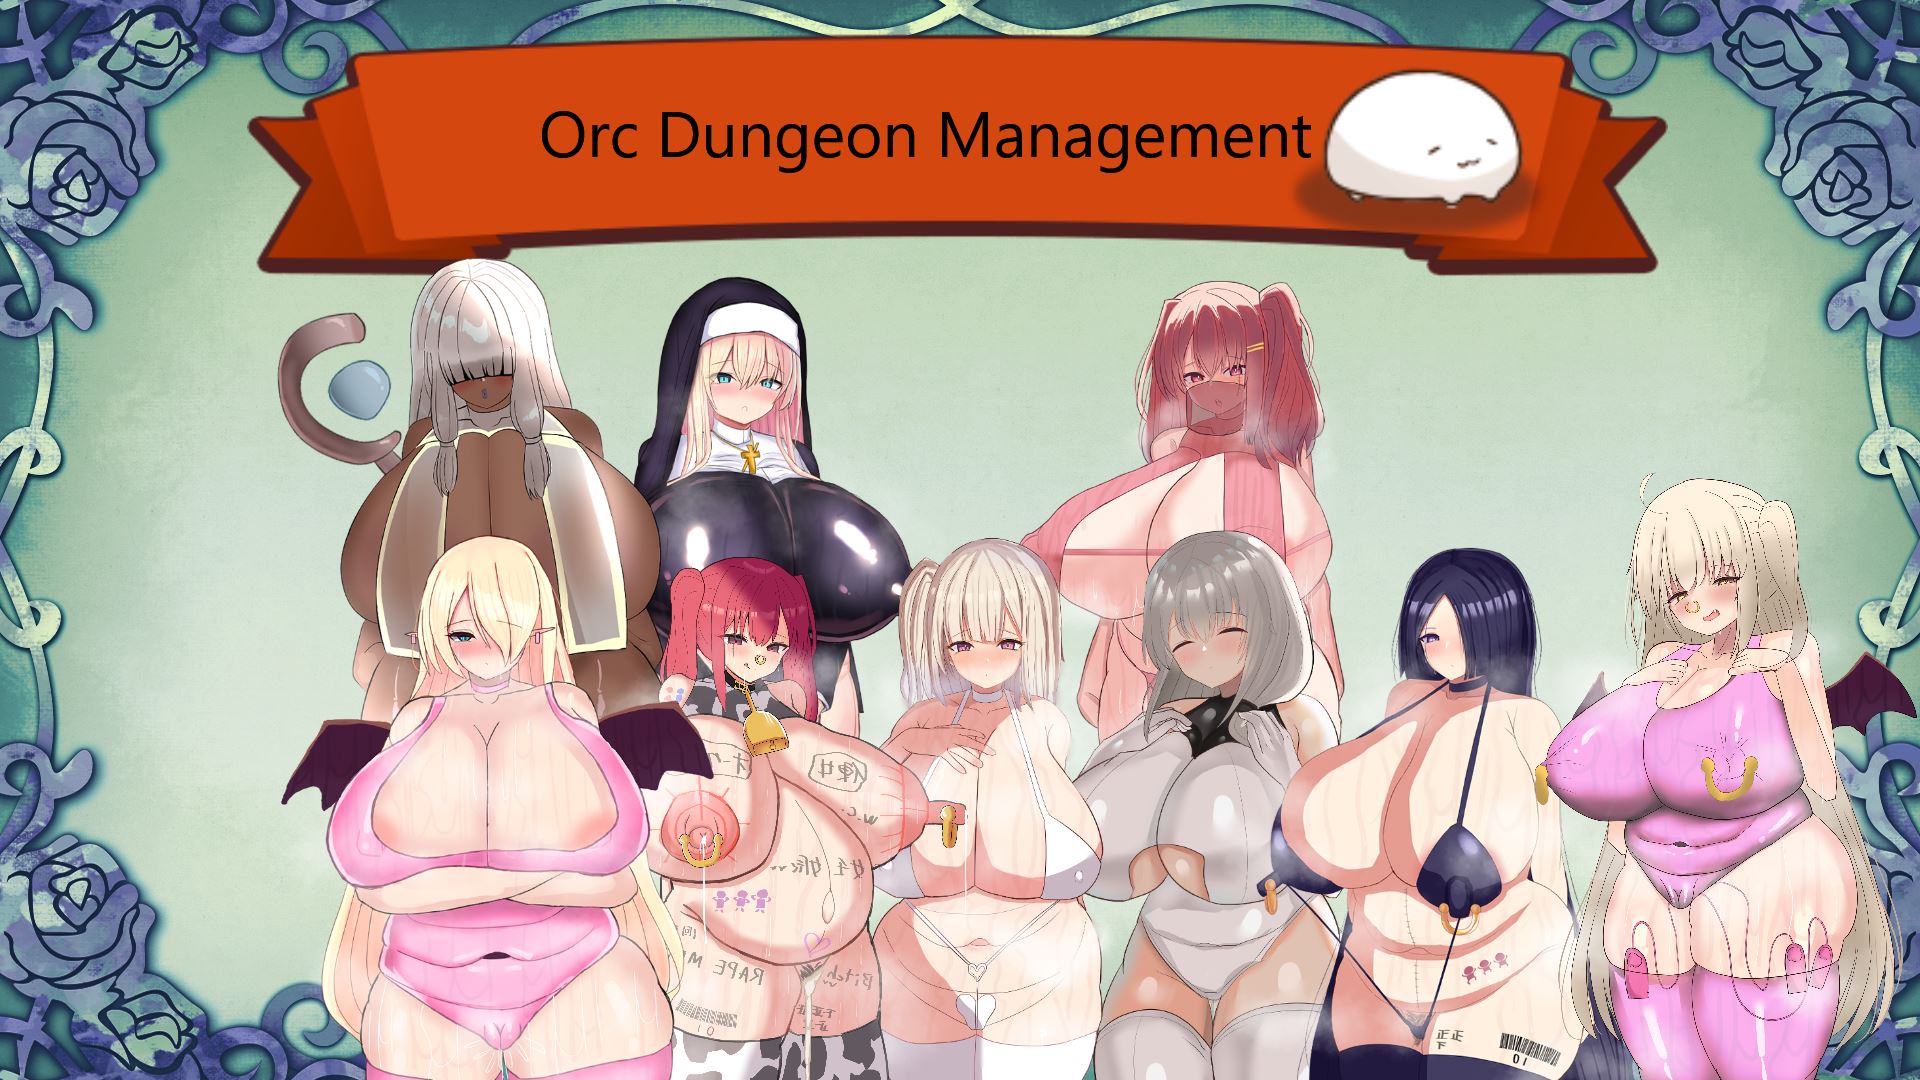 1920px x 1080px - Orc Dungeon Management RPGM Porn Sex Game v.Final Download for Windows